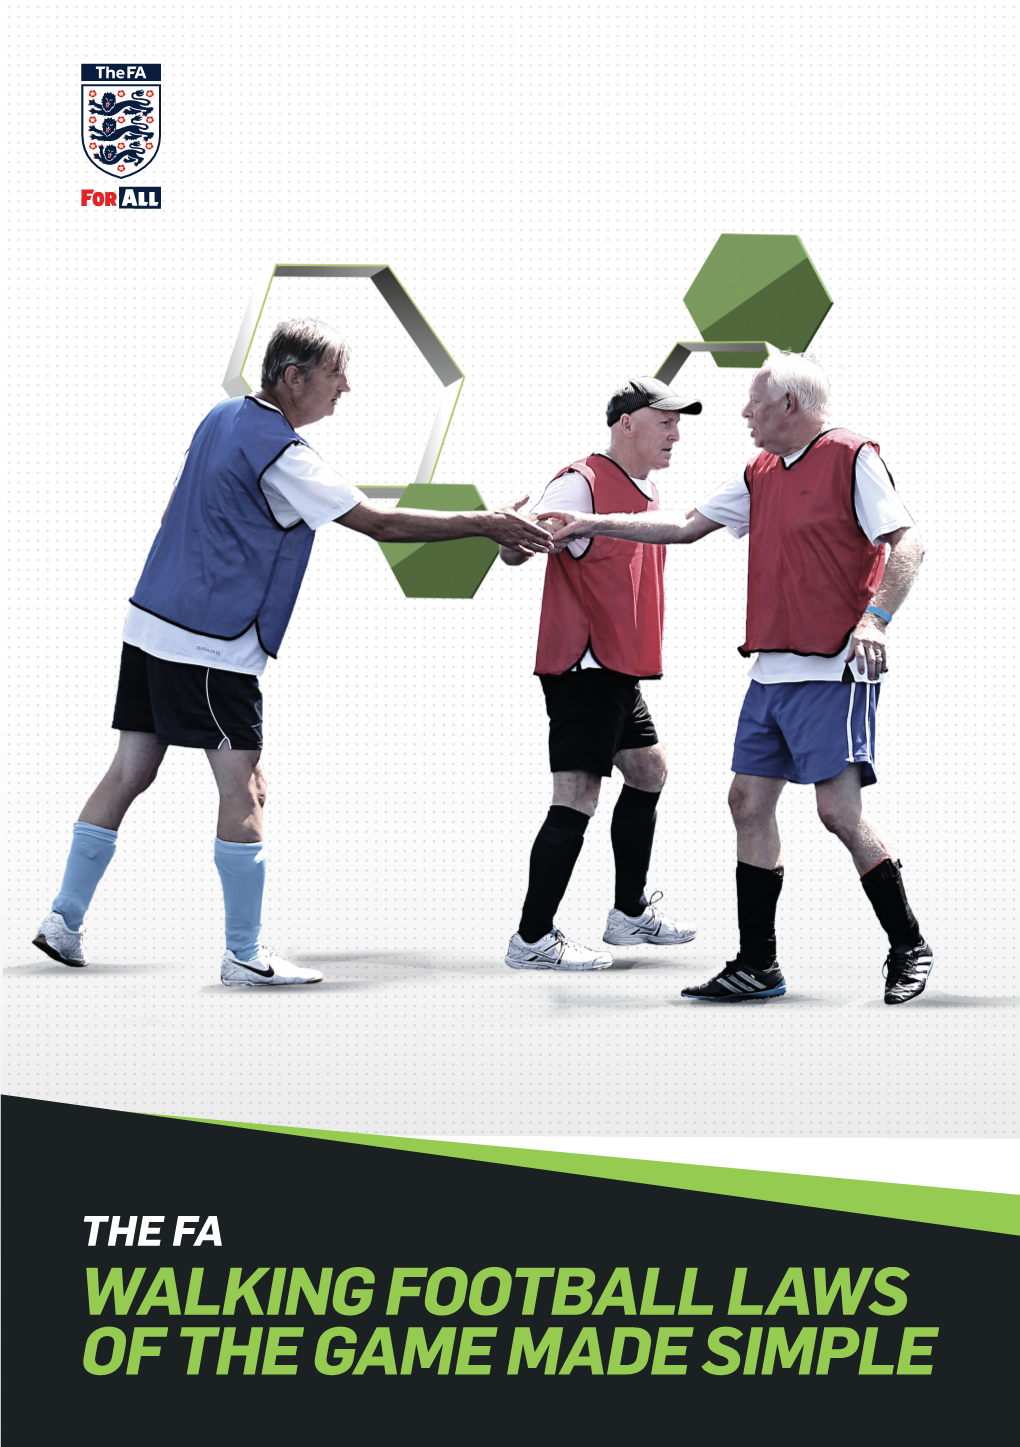 Walking Football Laws of the Game Made Simple Contents